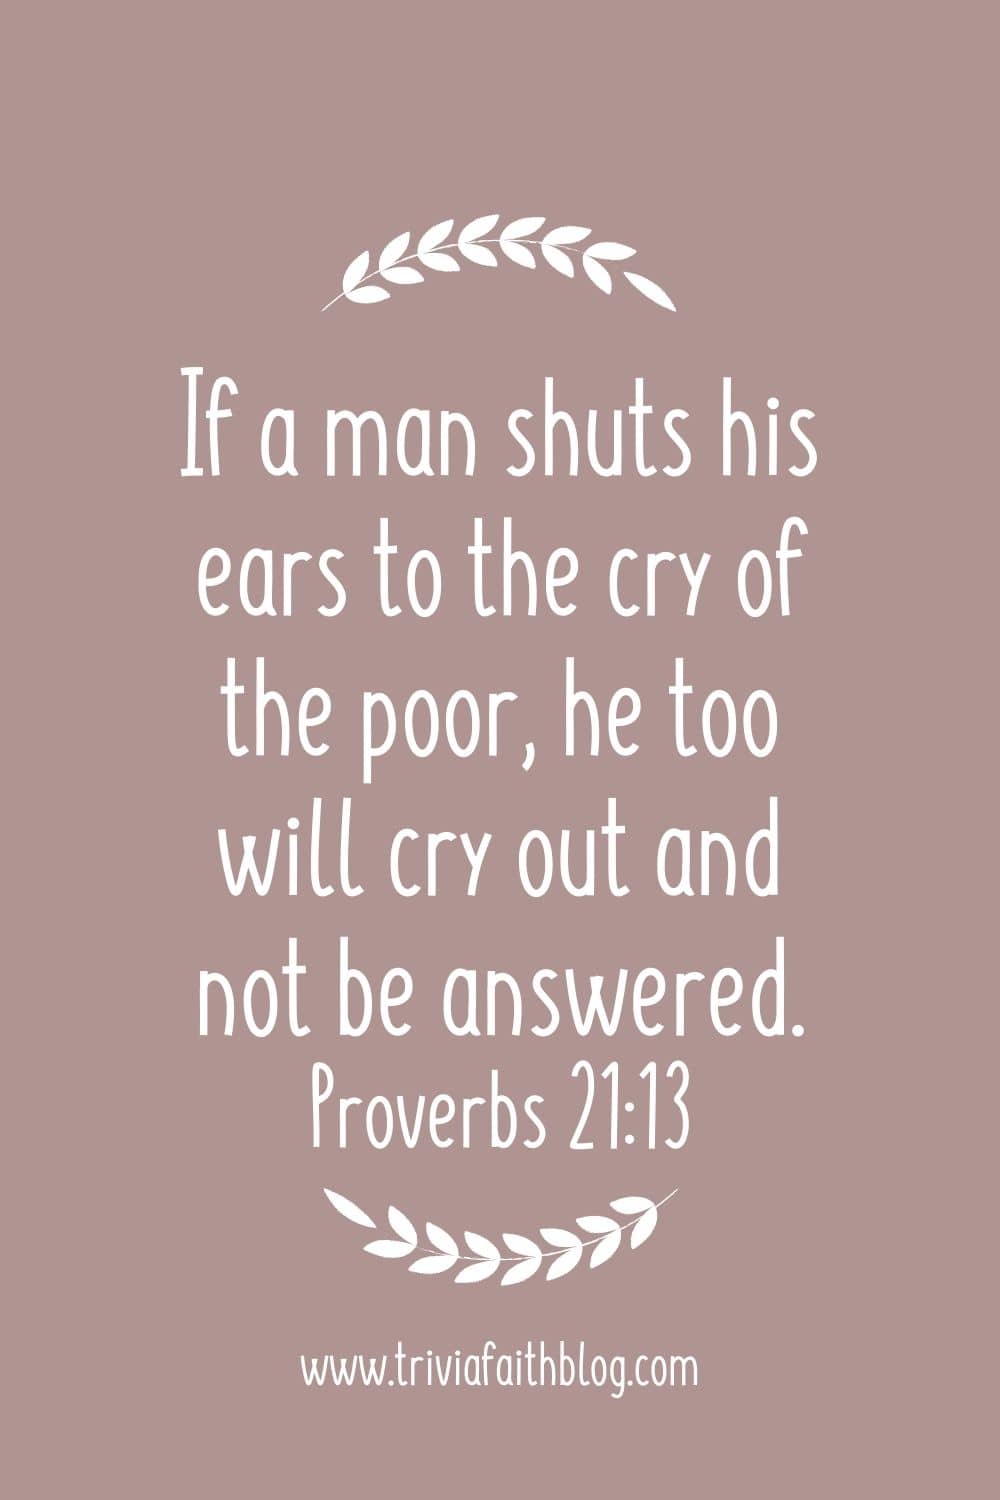 If a man shuts his ears to the cry of the poor